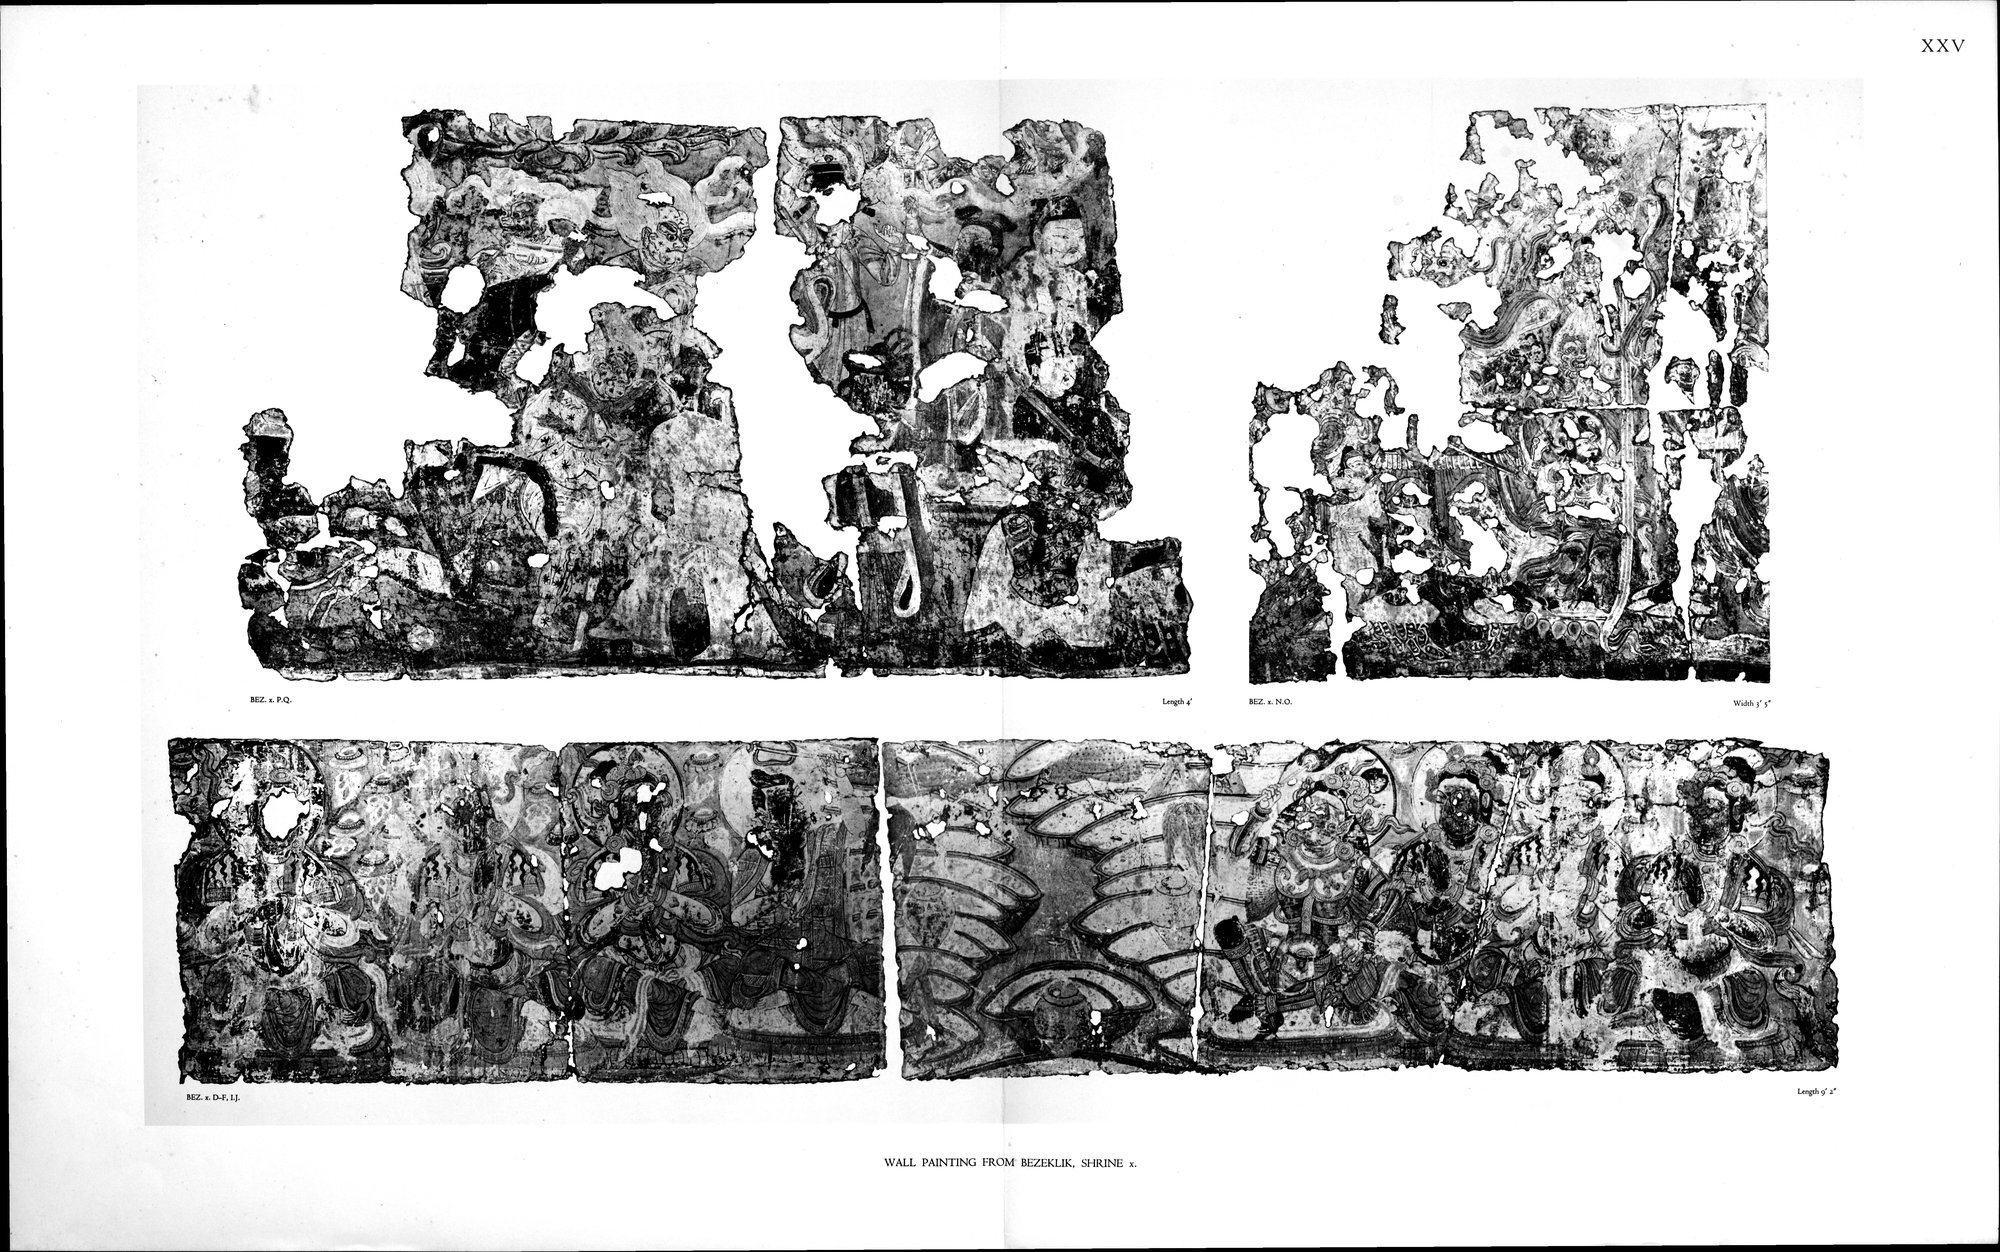 Wall Paintings from Ancient Shrines in Central Asia : vol.2 / Page 28 (Grayscale High Resolution Image)